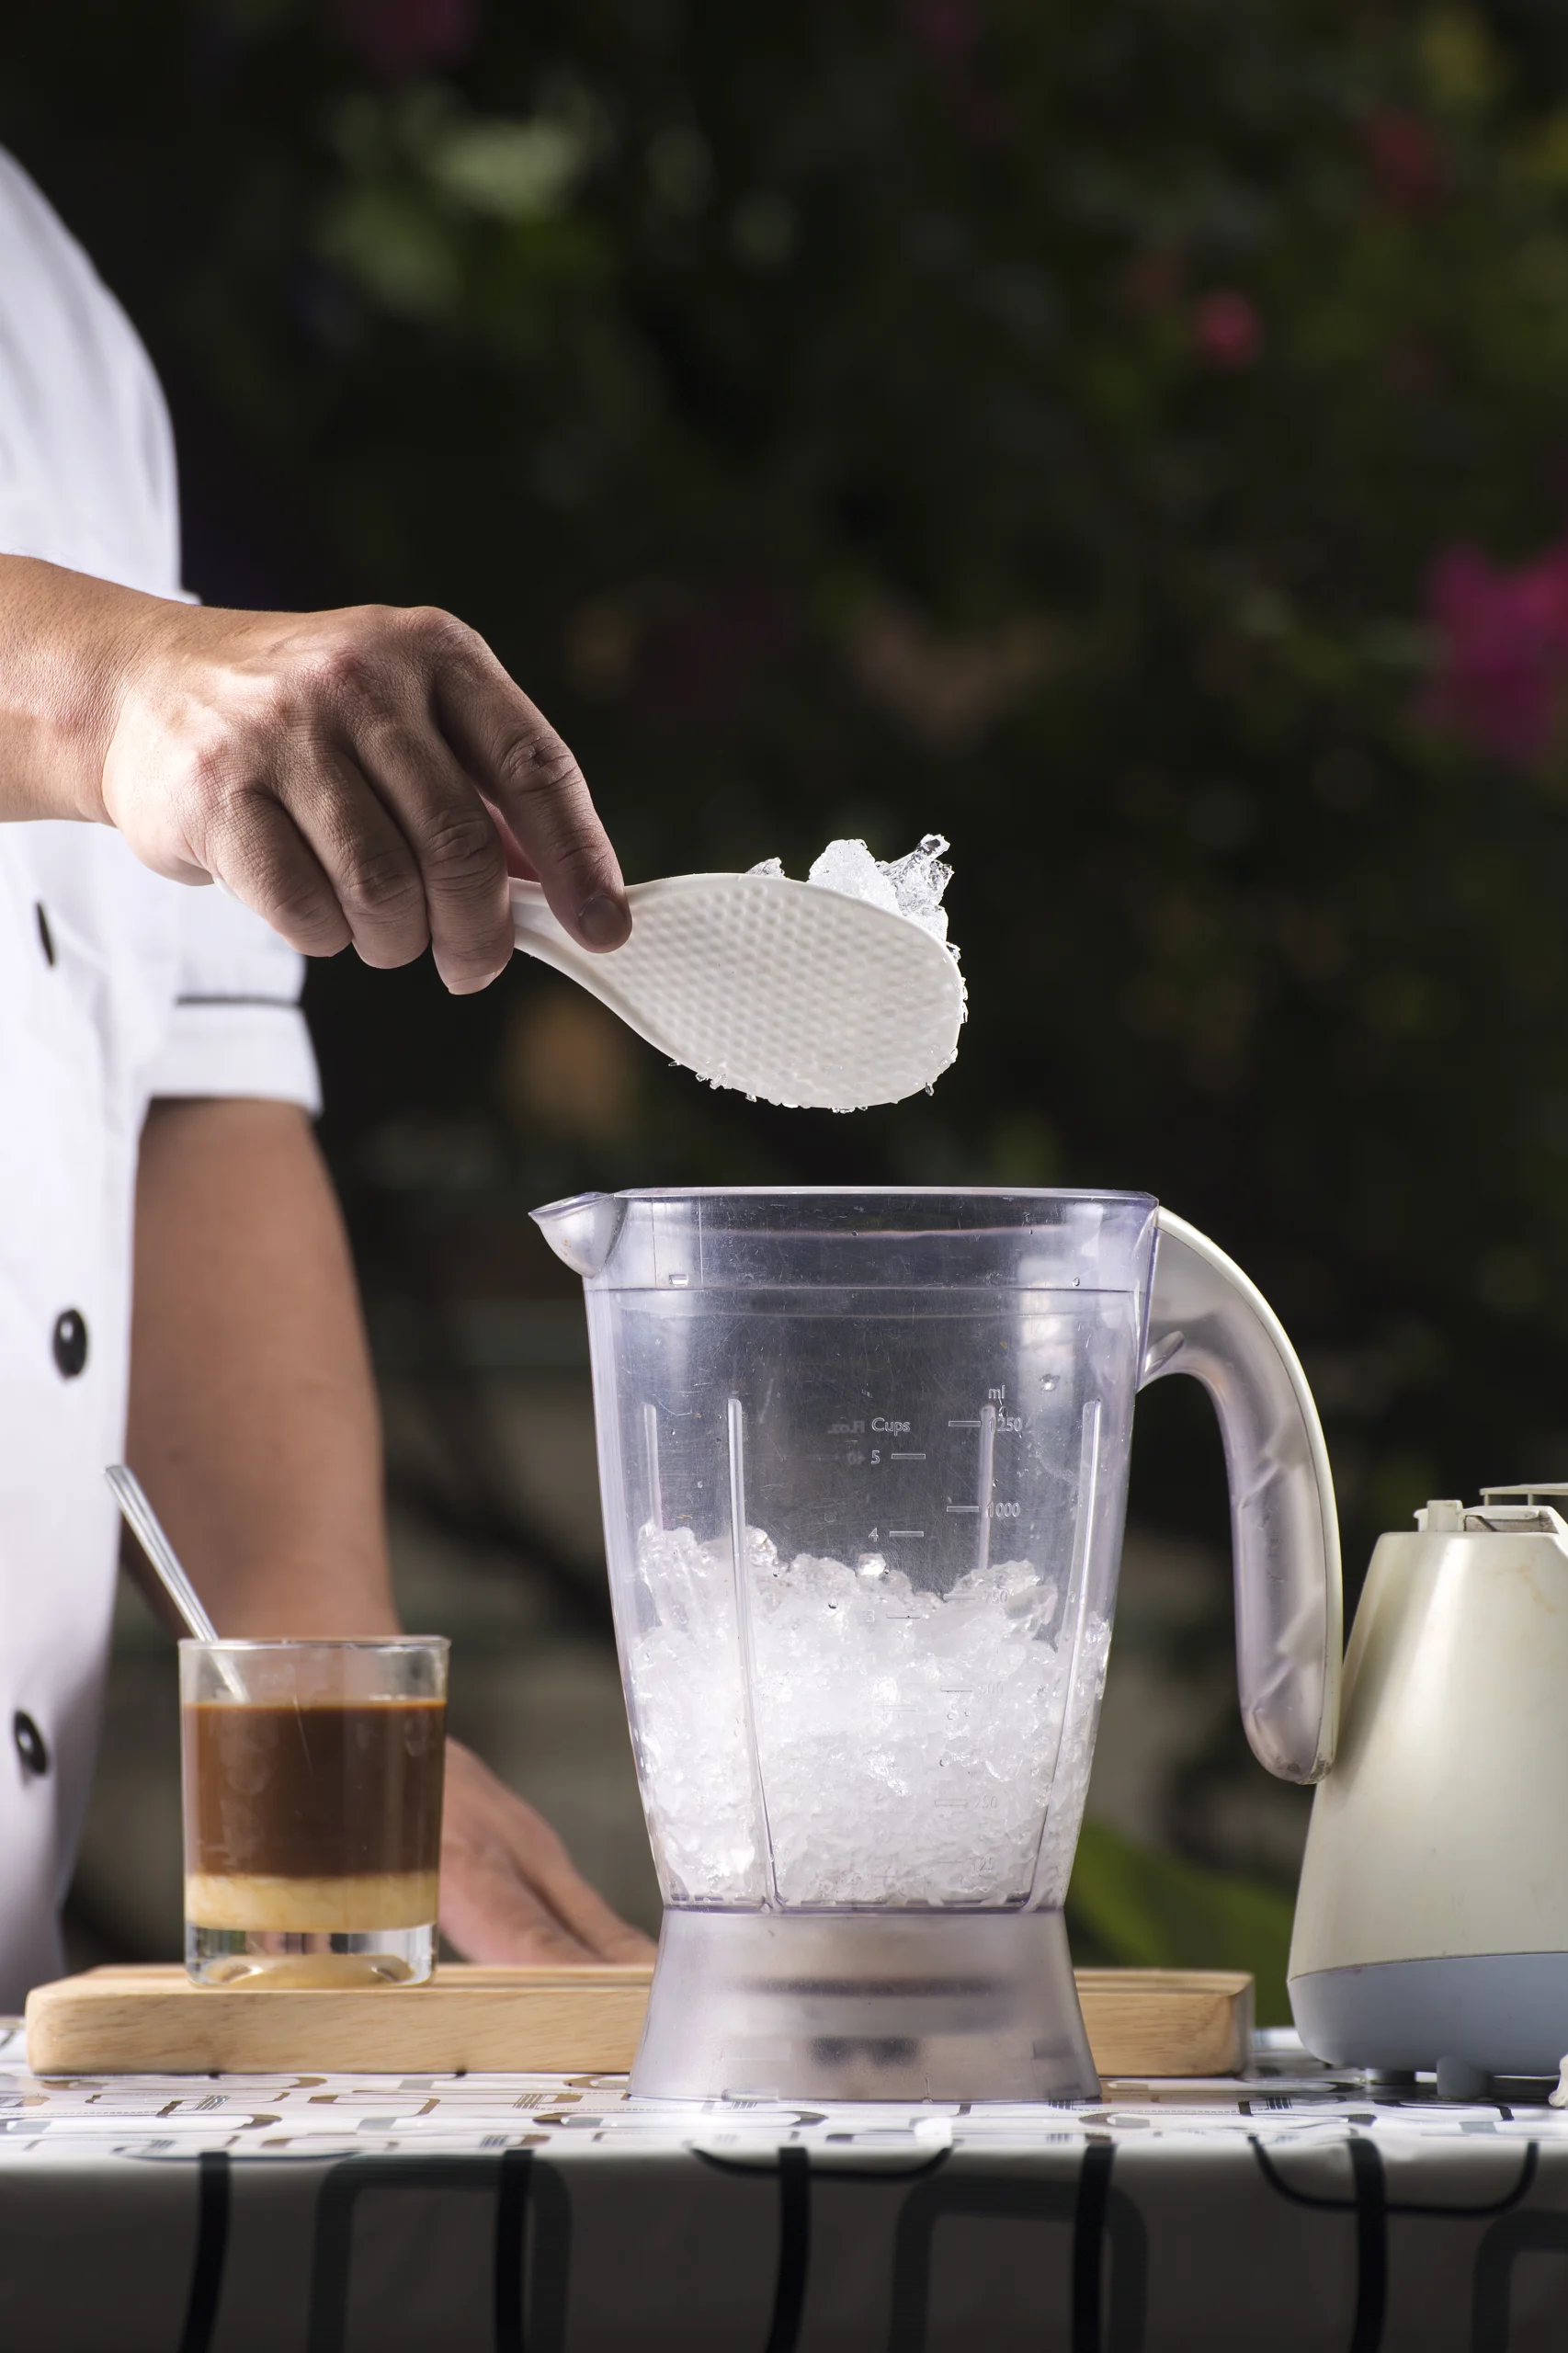 How to crush ice, How to crush ice at home using blender or food processor, Crushed ice cubes